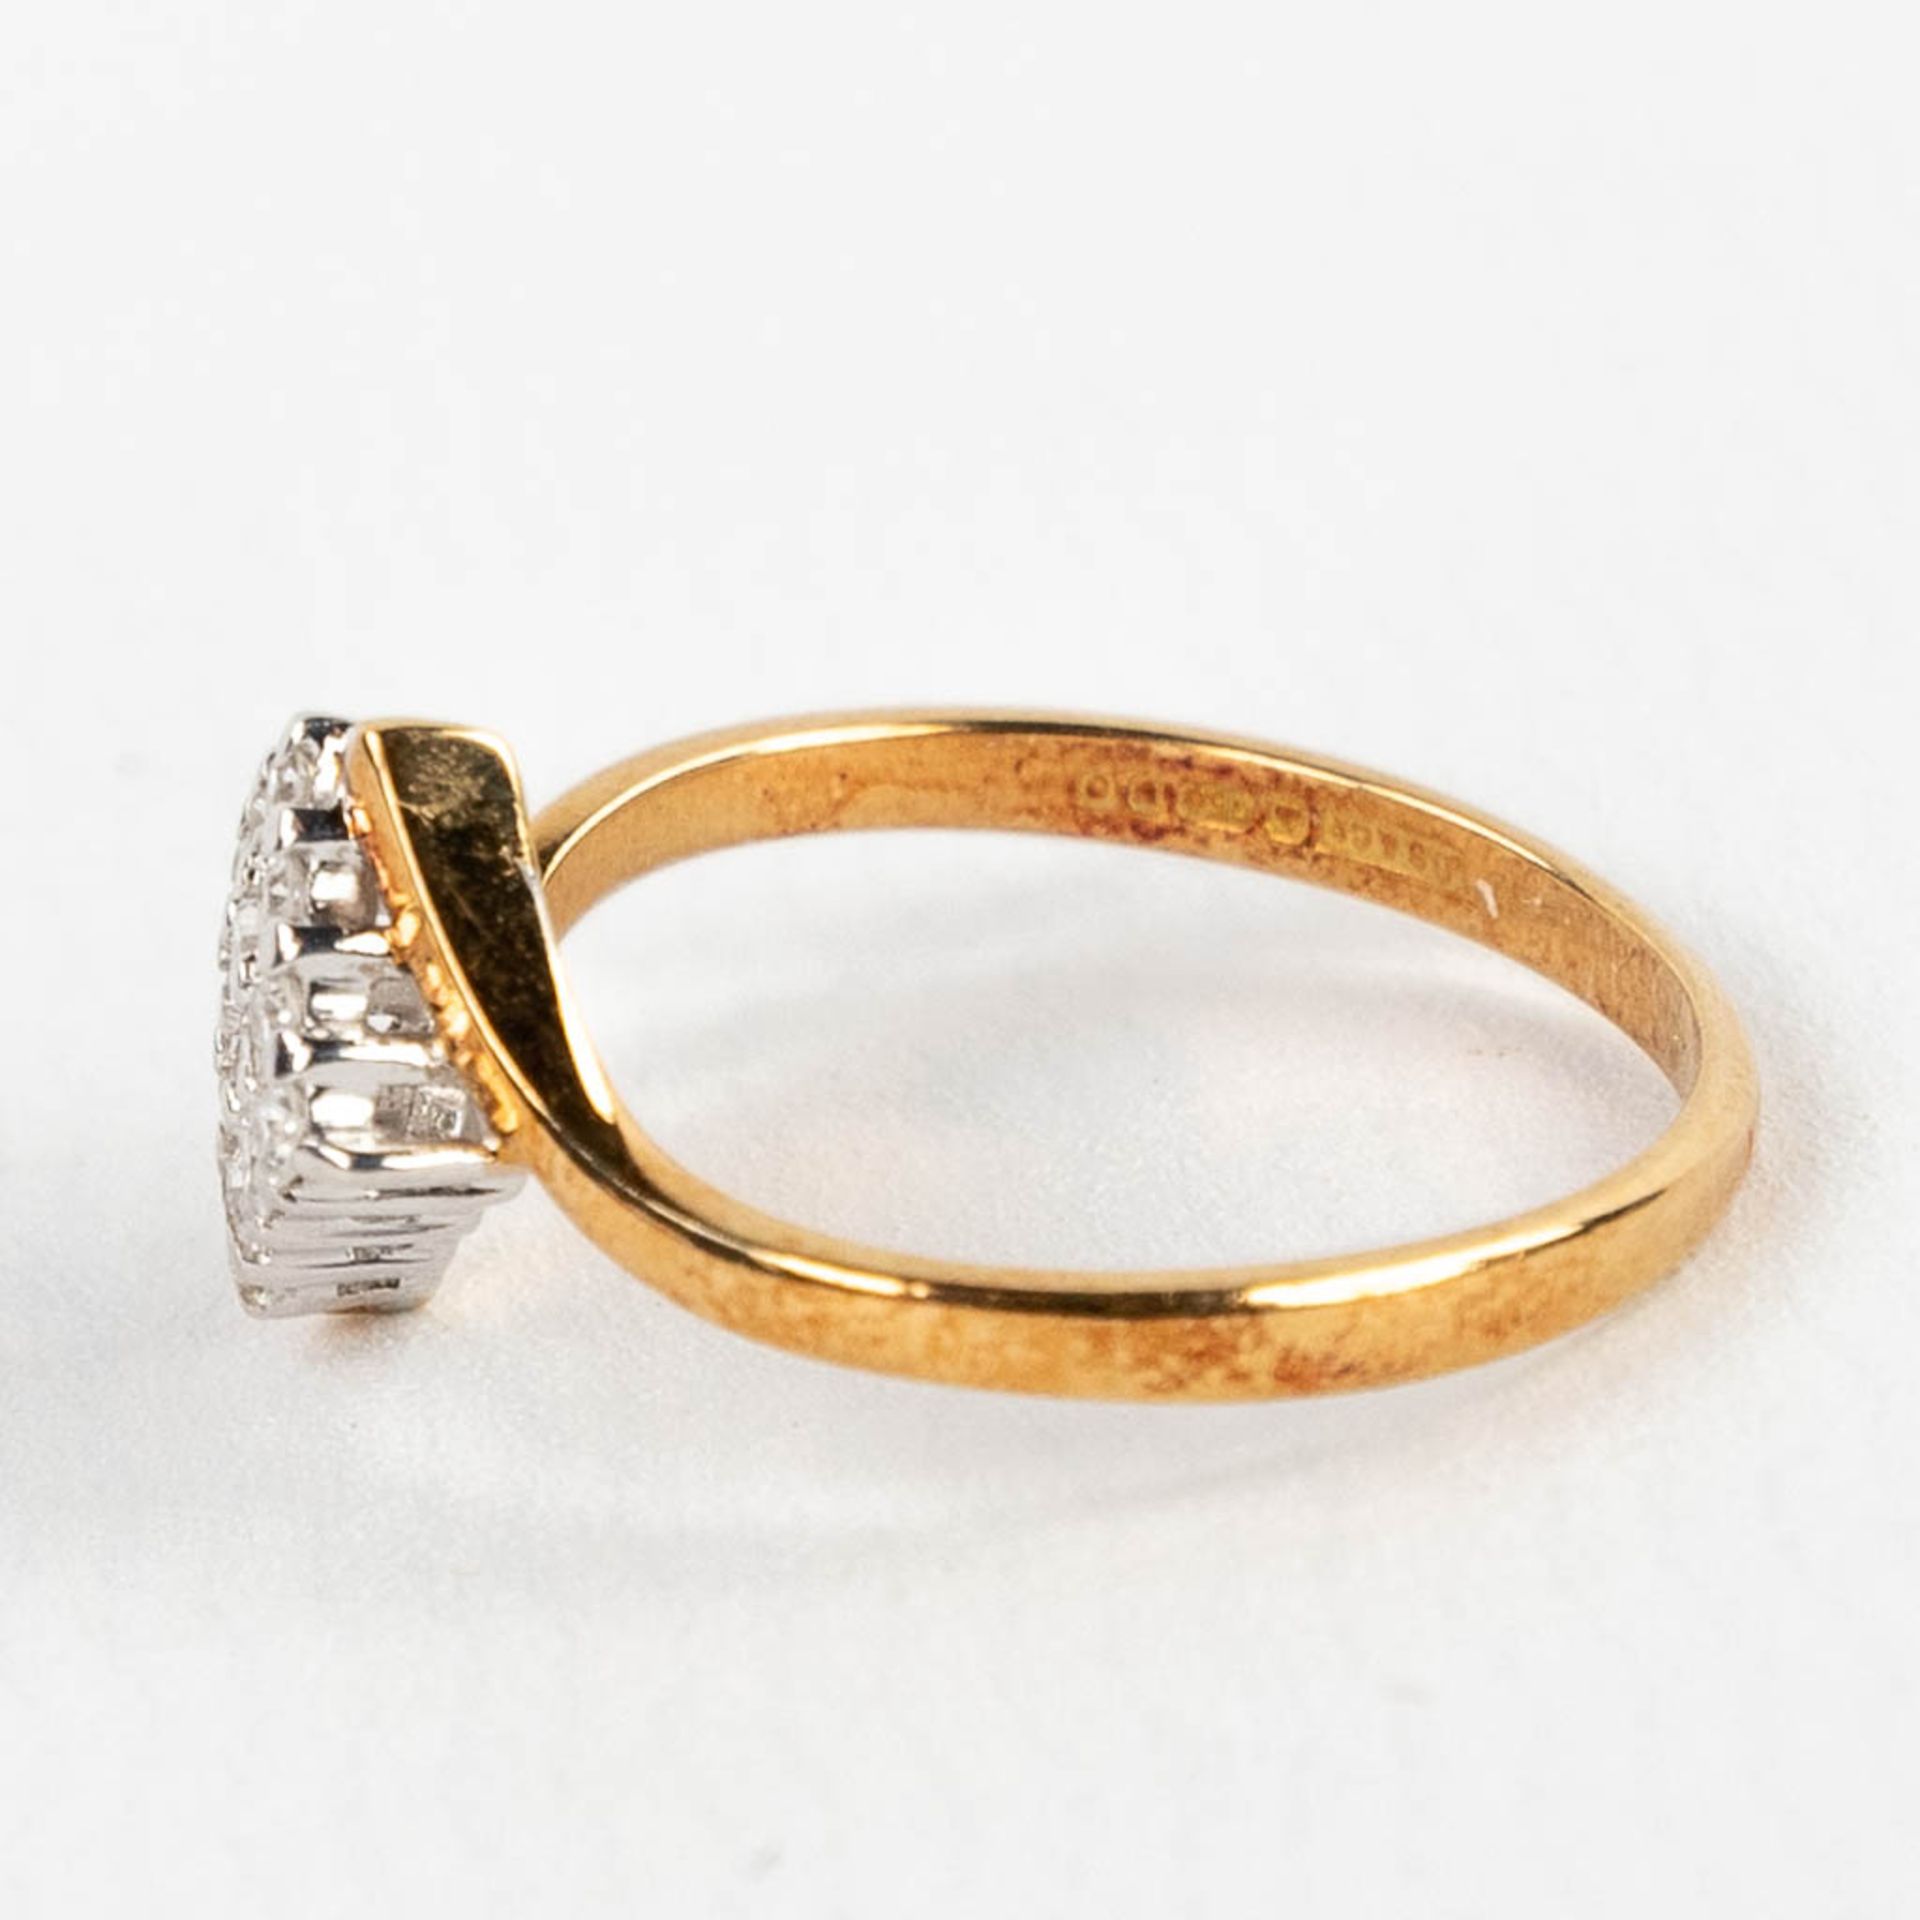 A yellow and white gold ring finished with 9 brilliants. 2,14g. size: 51 - Image 8 of 12